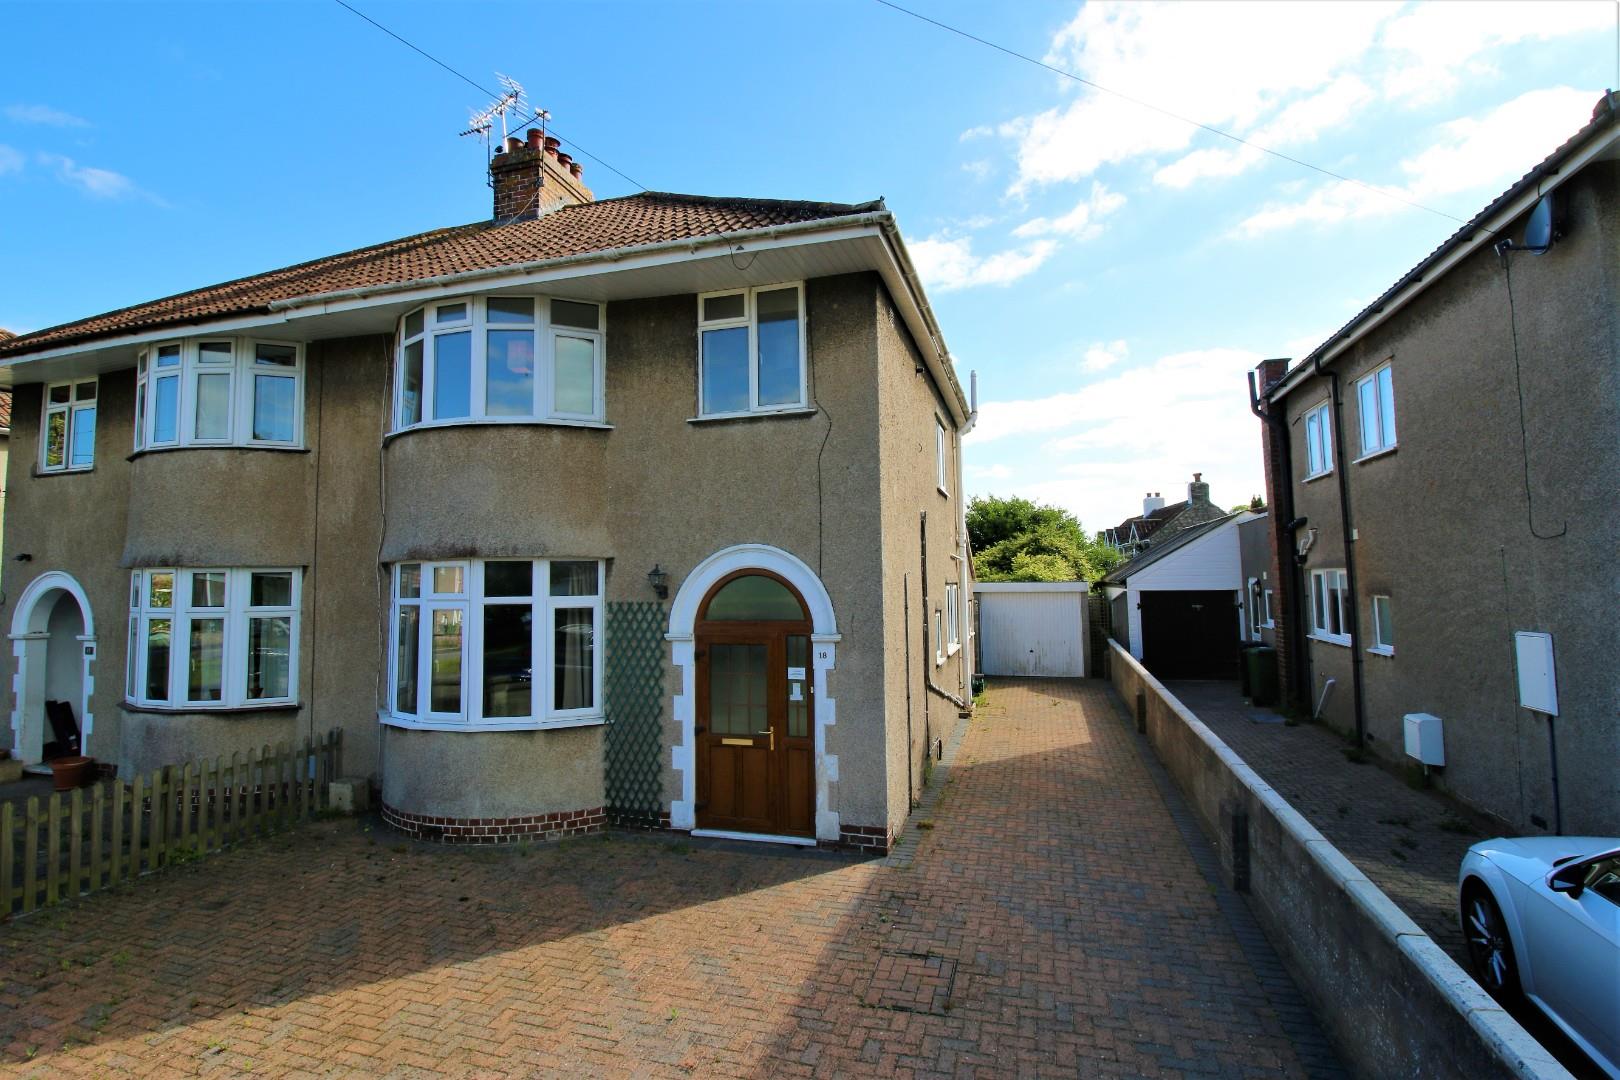 Charming 1930's family home in the heart of Yatton village